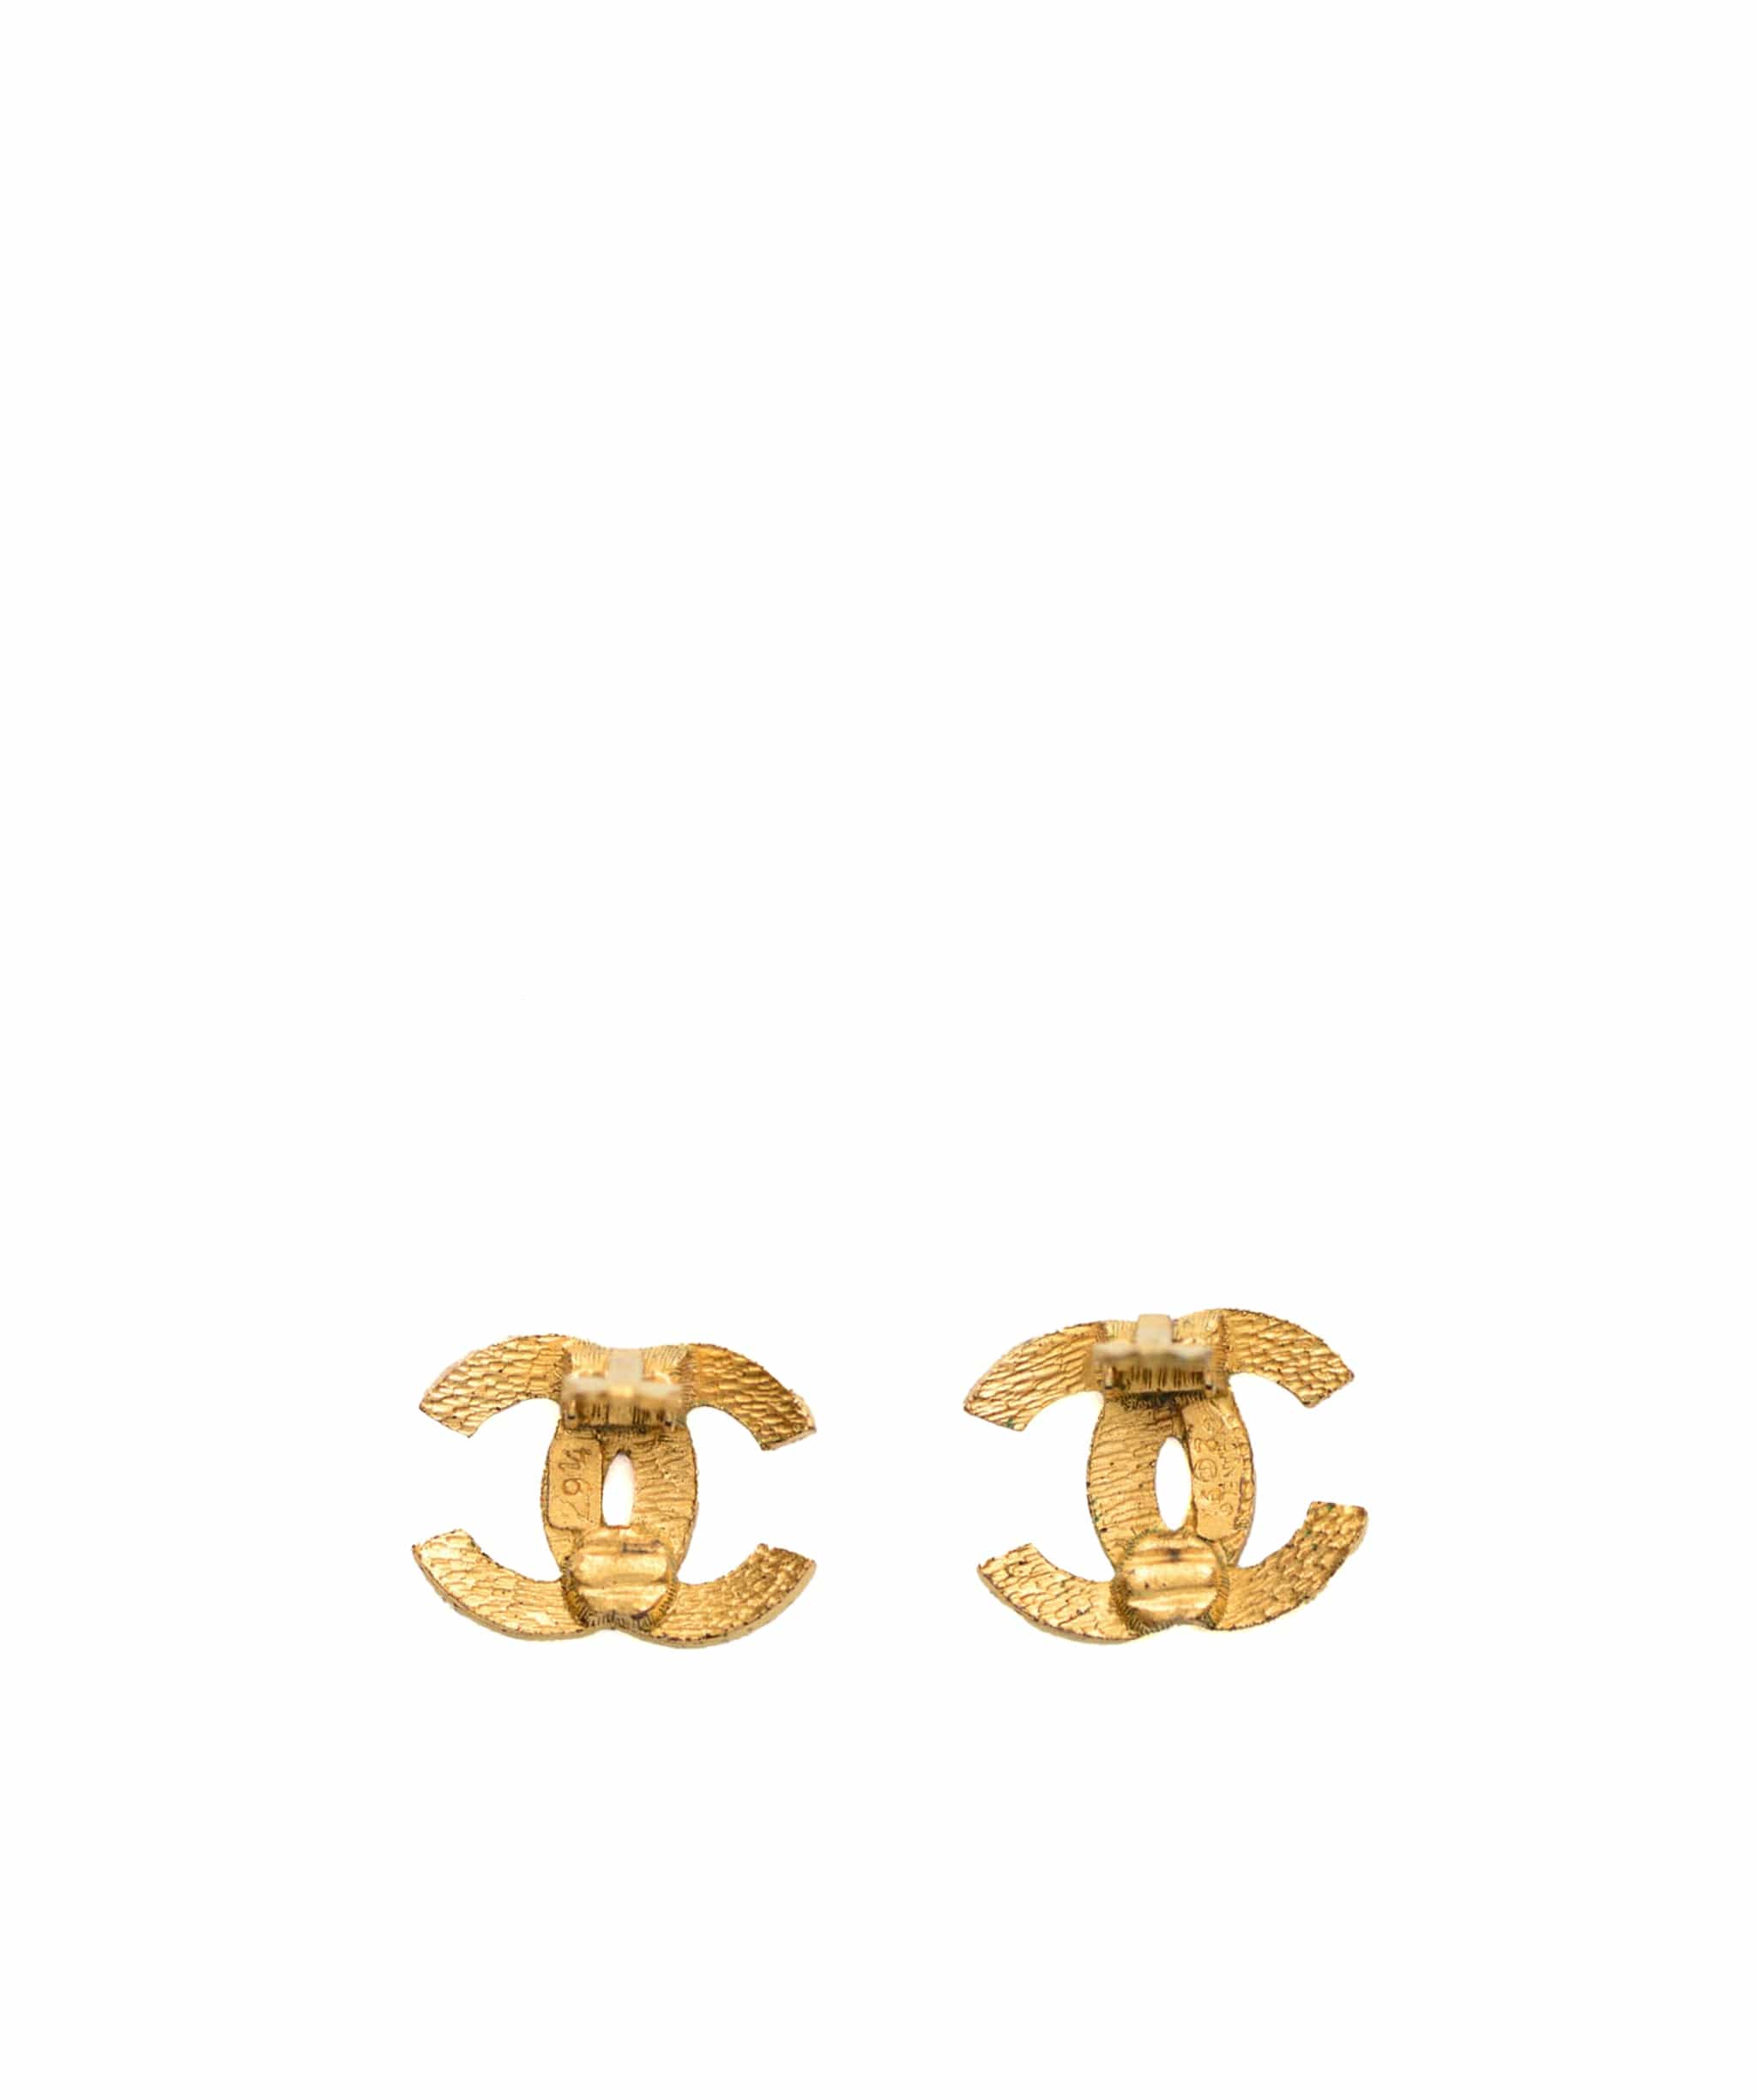 Chanel Chanel Vintage Clip-on Earrings - Classic CC Hammered SKC1130